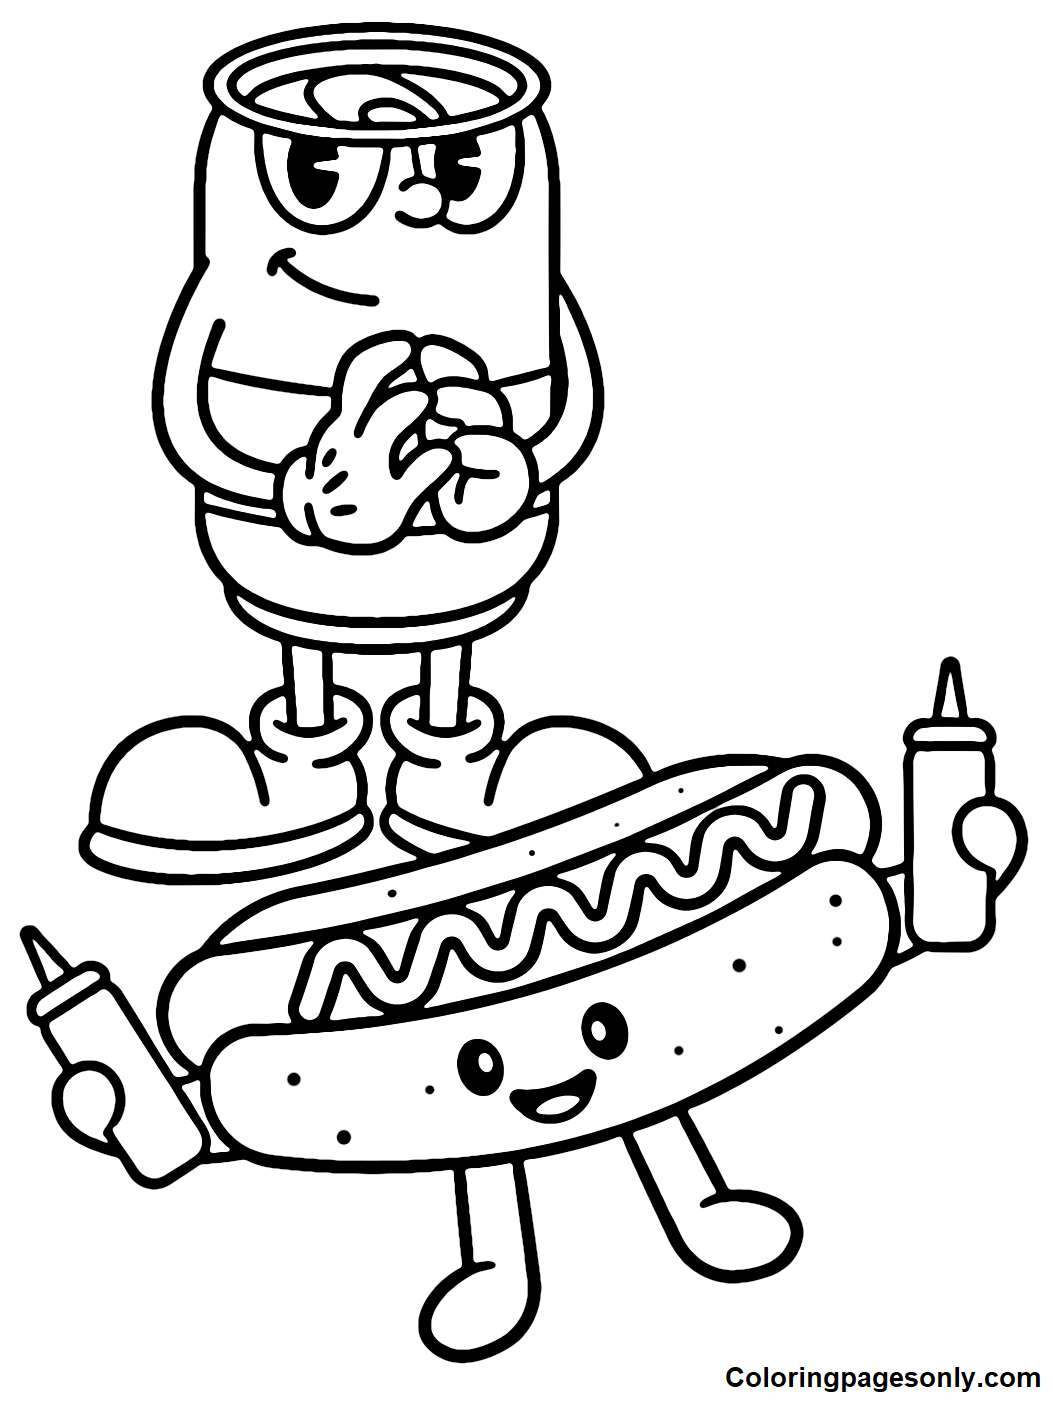 Hot Dog Holding Mustard and Sauce Coloring Pages